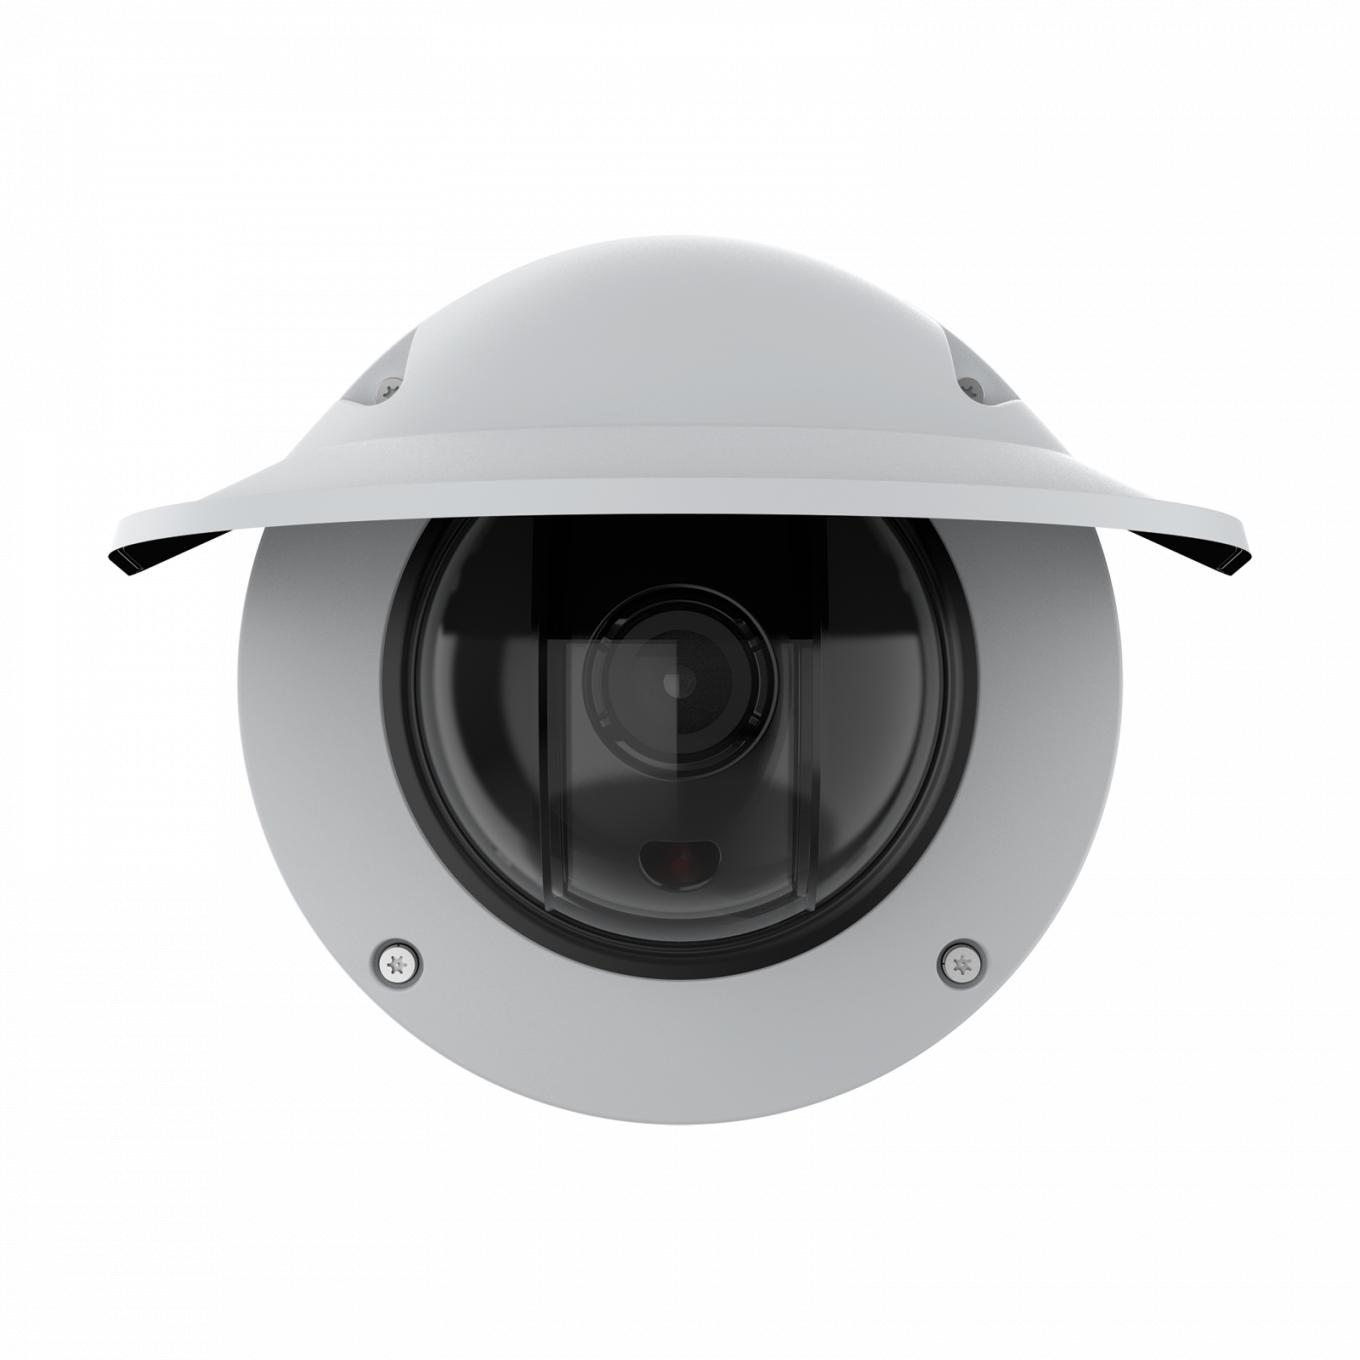 AXIS Q3538-LVE Dome Camera, viewed from its front